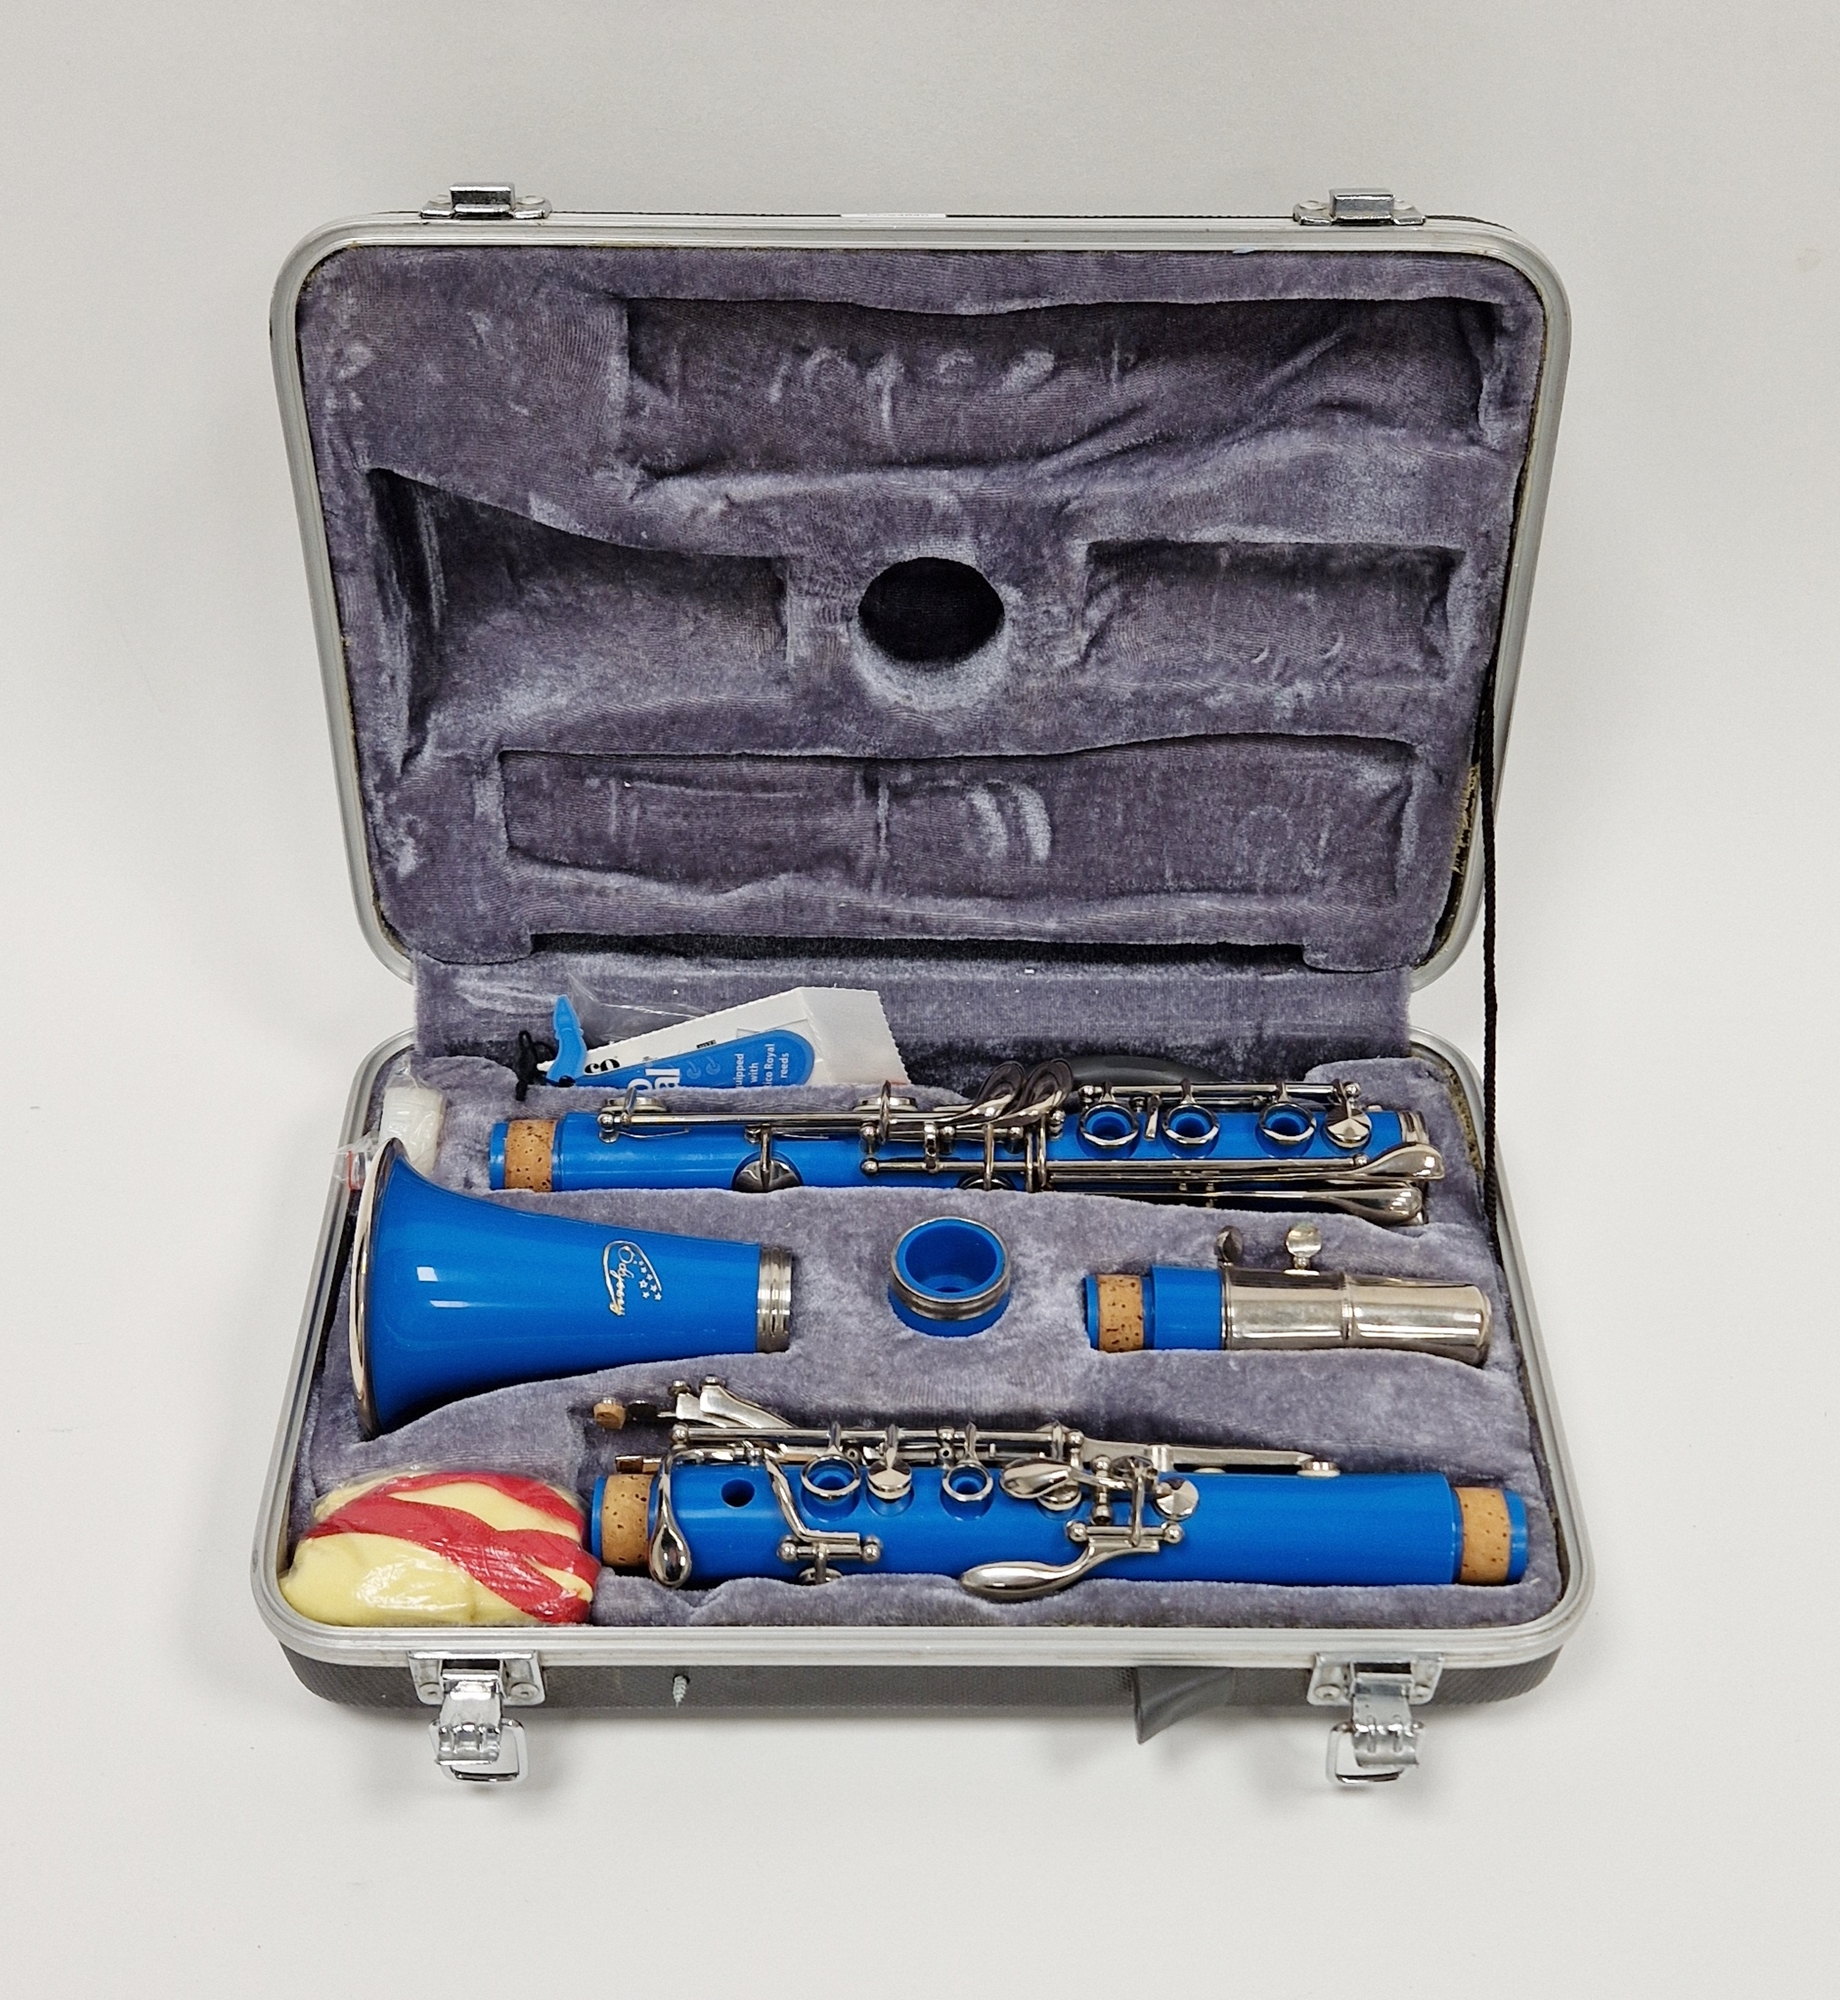 Clarinet marked 'Odyssey', in fitted carrying case made by Rico Royale - Image 2 of 2